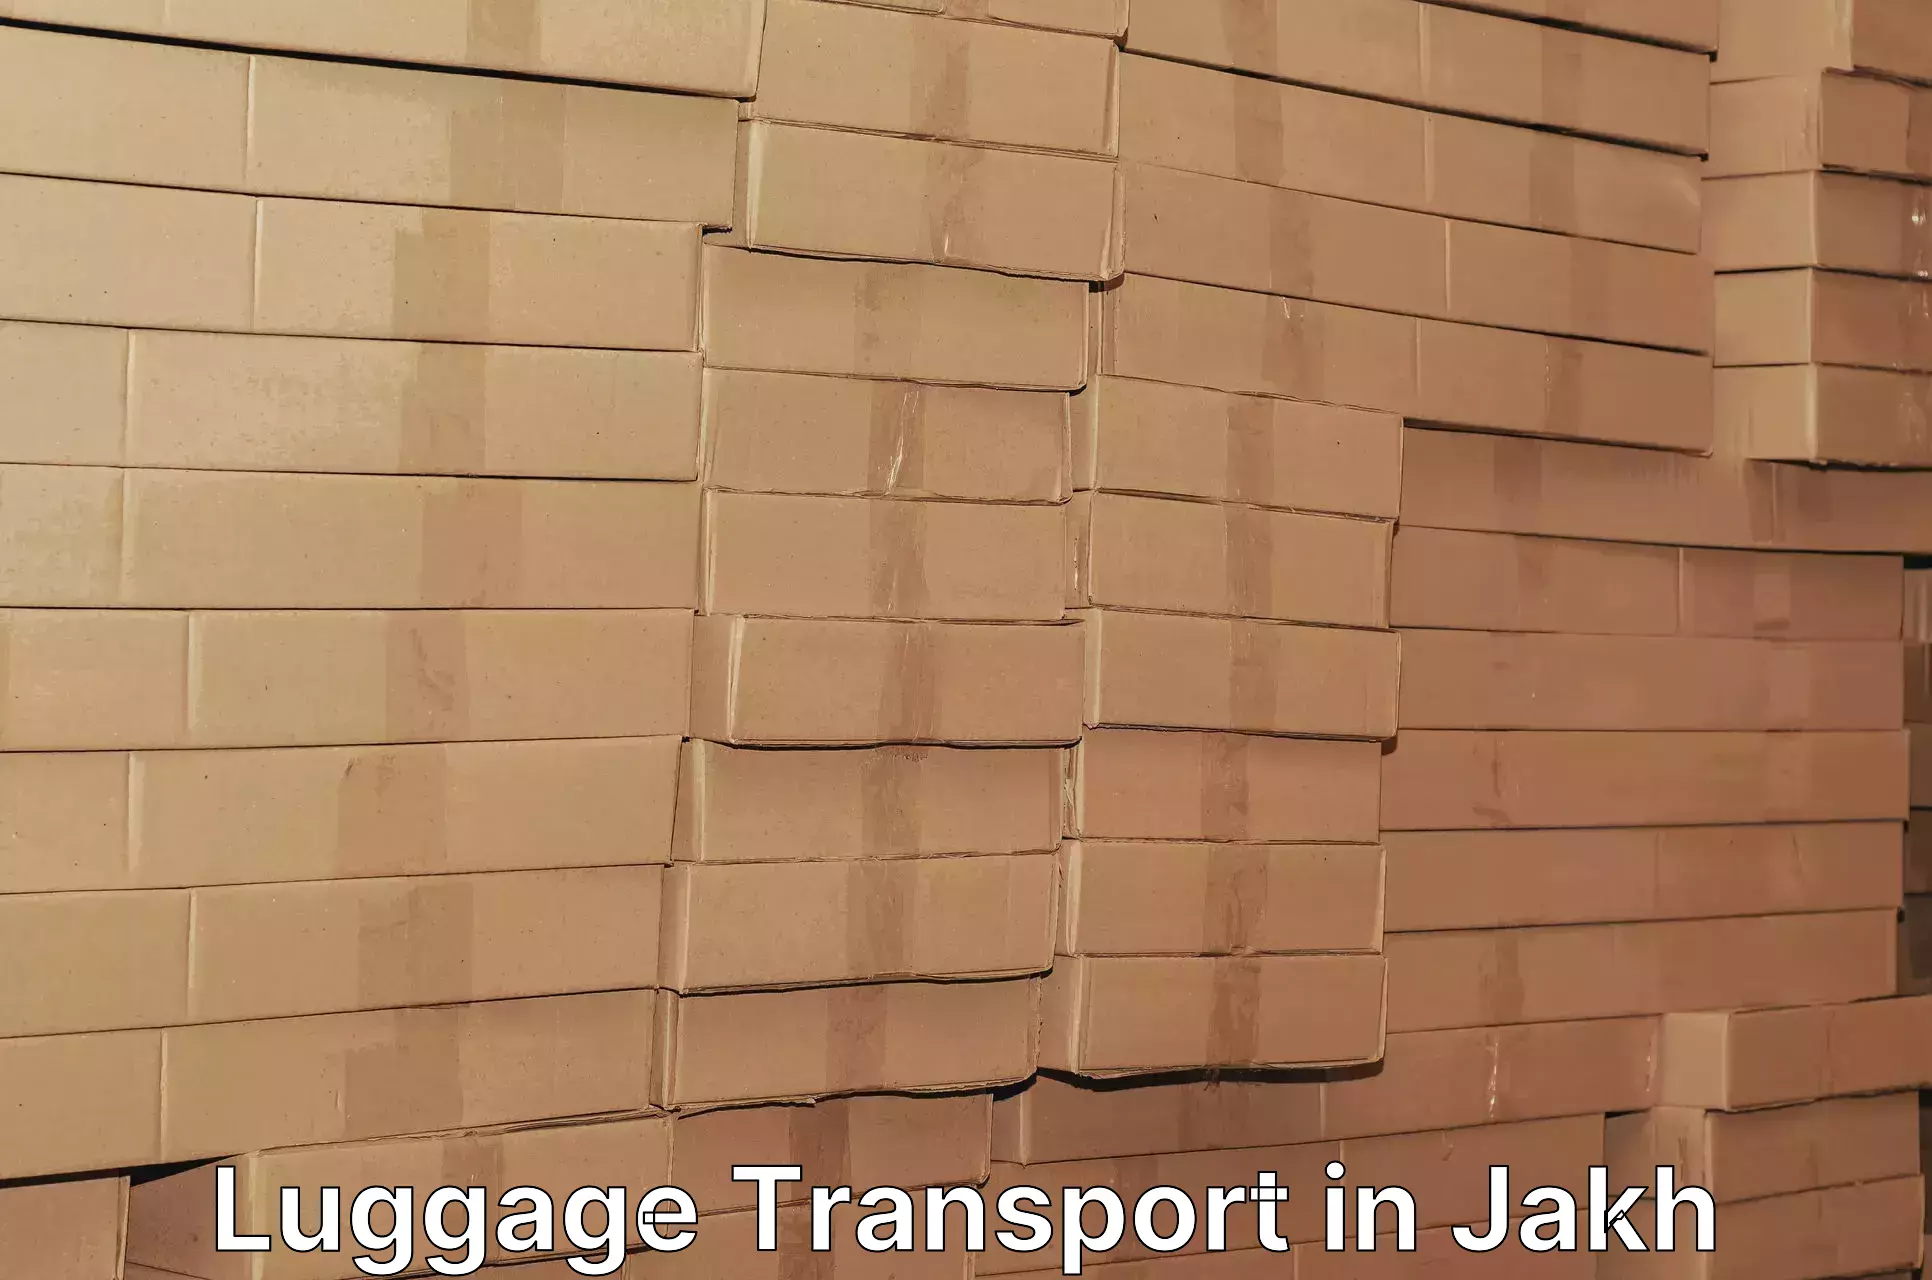 Luggage storage and delivery in Jakh